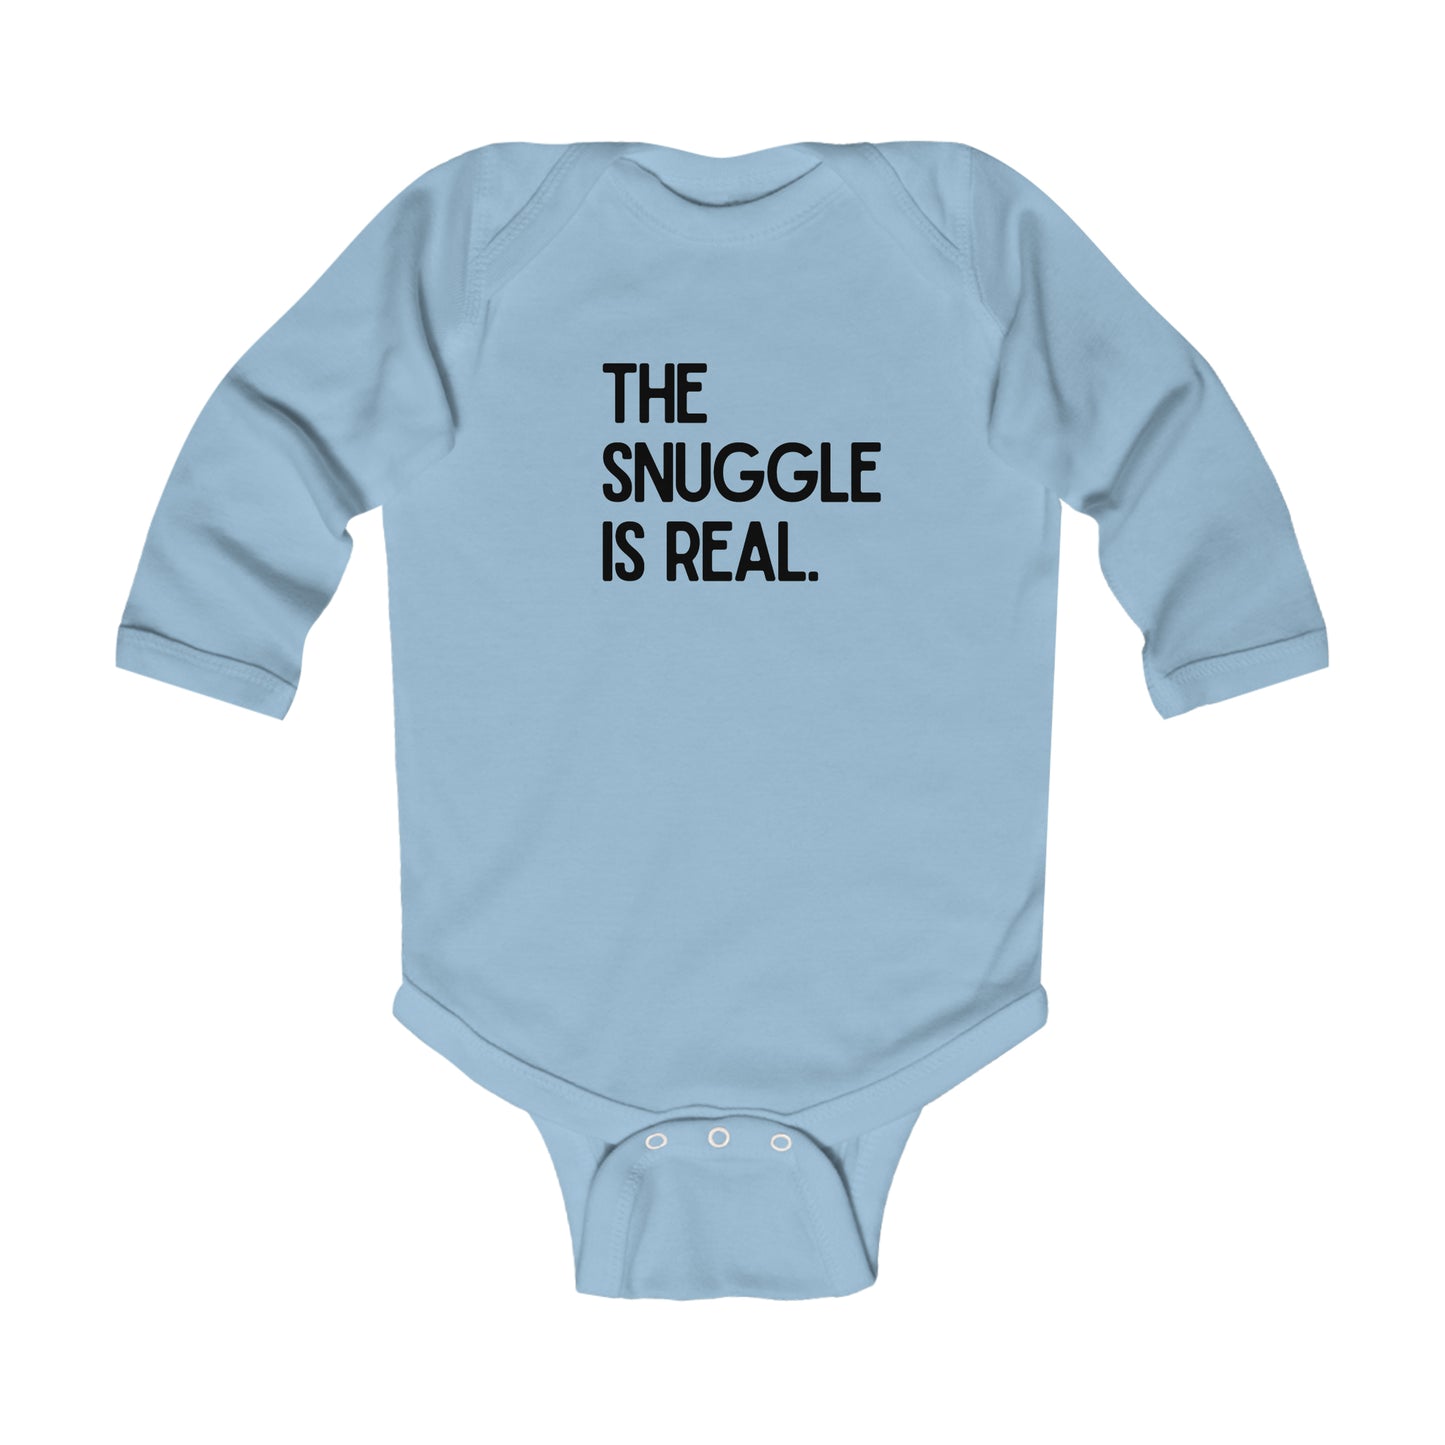 The snuggle is real - Infant Long Sleeve Bodysuit